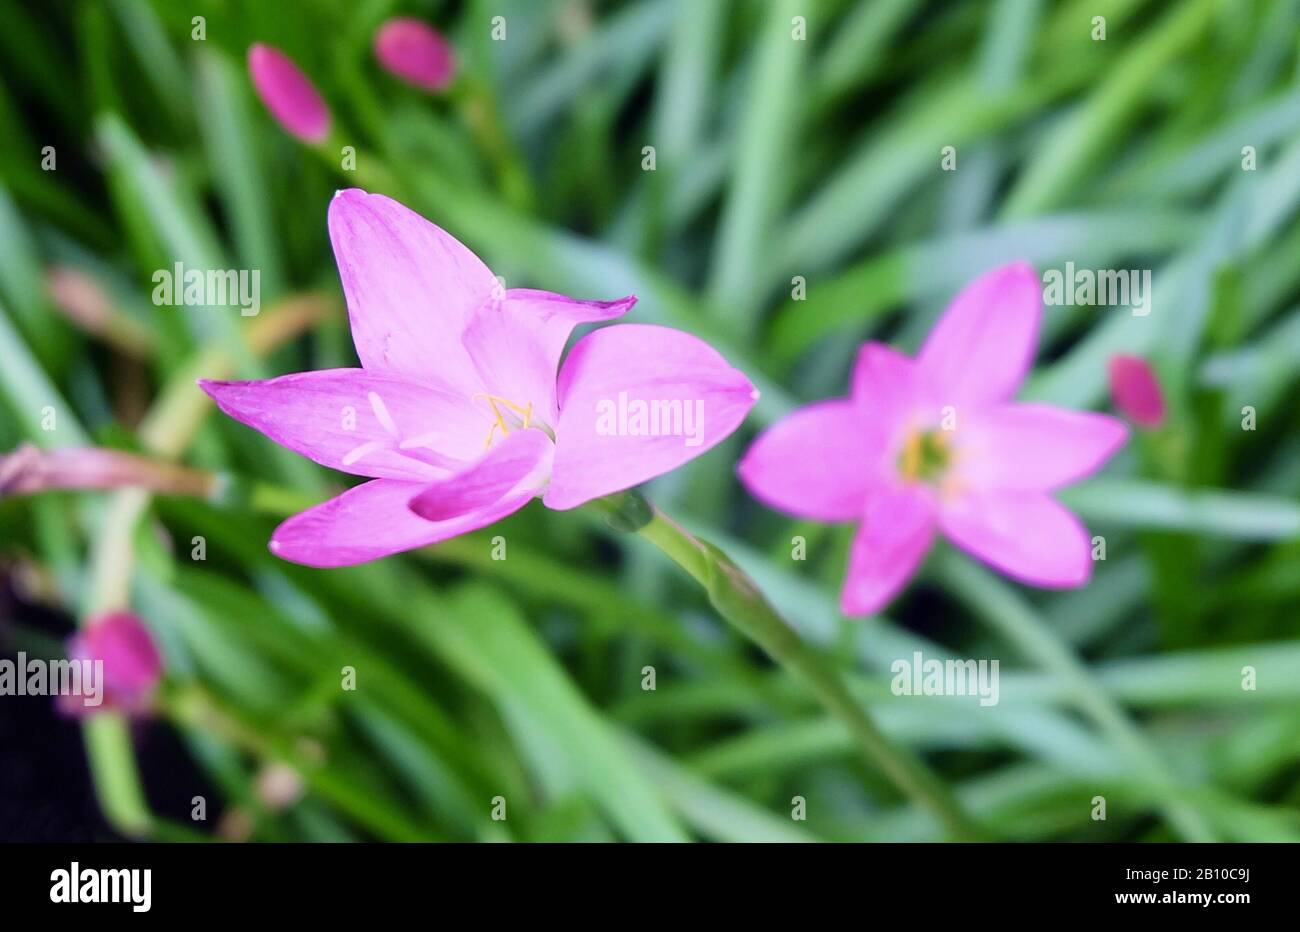 Beautiful Flower, A Fresh Zephyranthes Rosea or Pink Rain Lily Flowers on Green Leaves Blooming in A Garden. Stock Photo